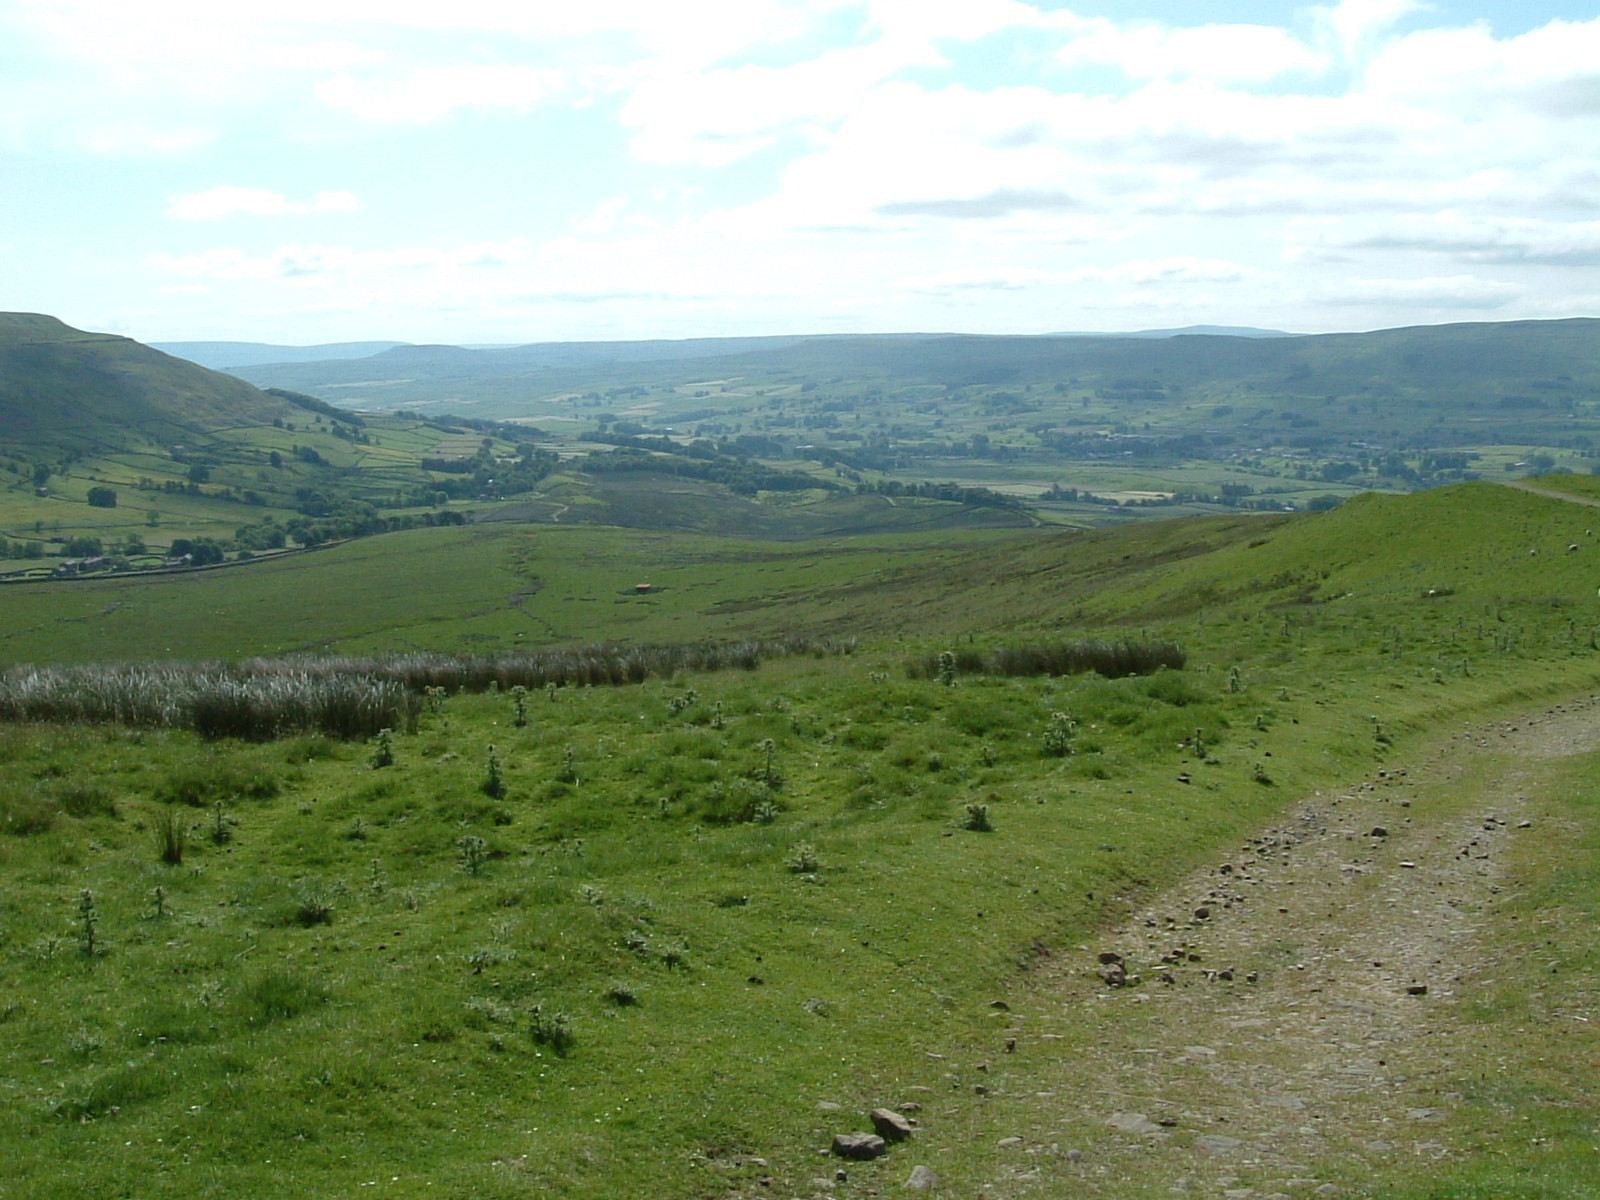 Looking back to Hawes from the lower slopes of Great Shunner Fell